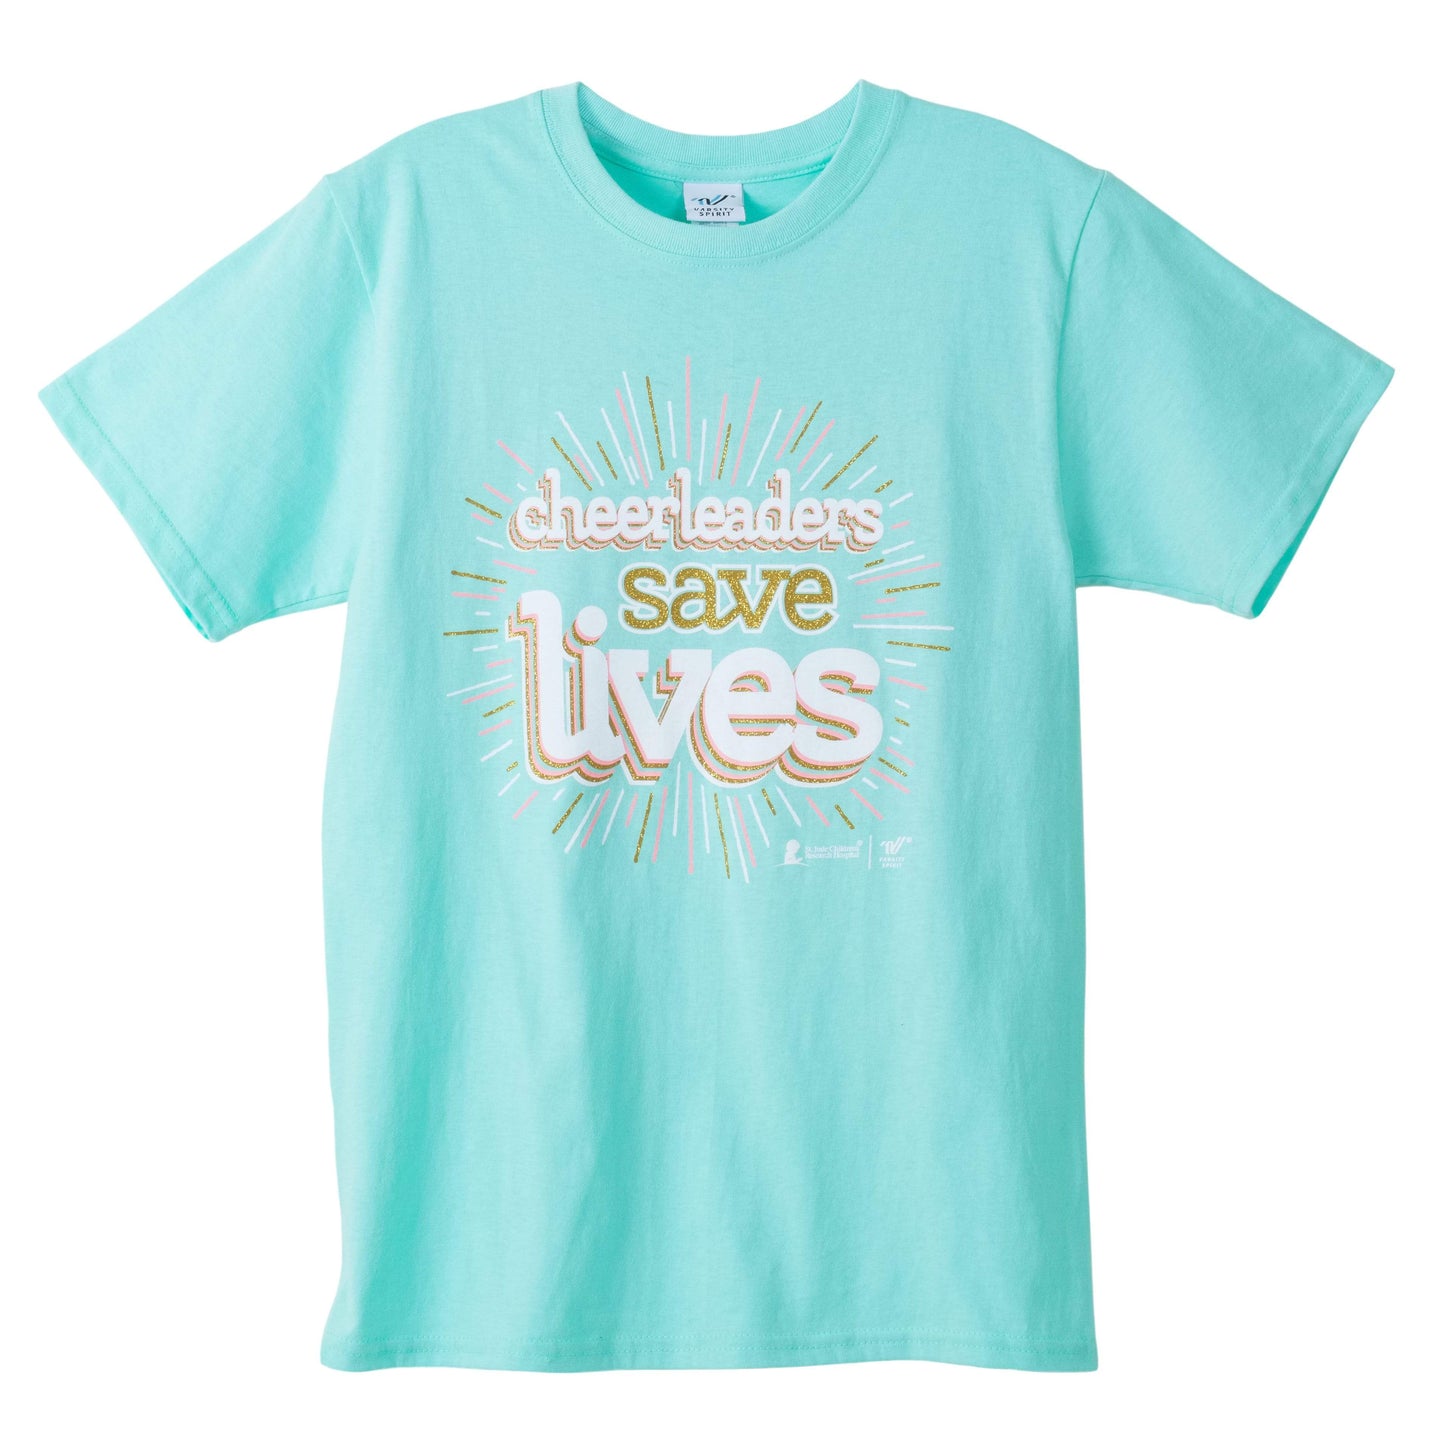 Load image into Gallery viewer, St. Jude T-Shirt - Cheerleaders Save Lives
